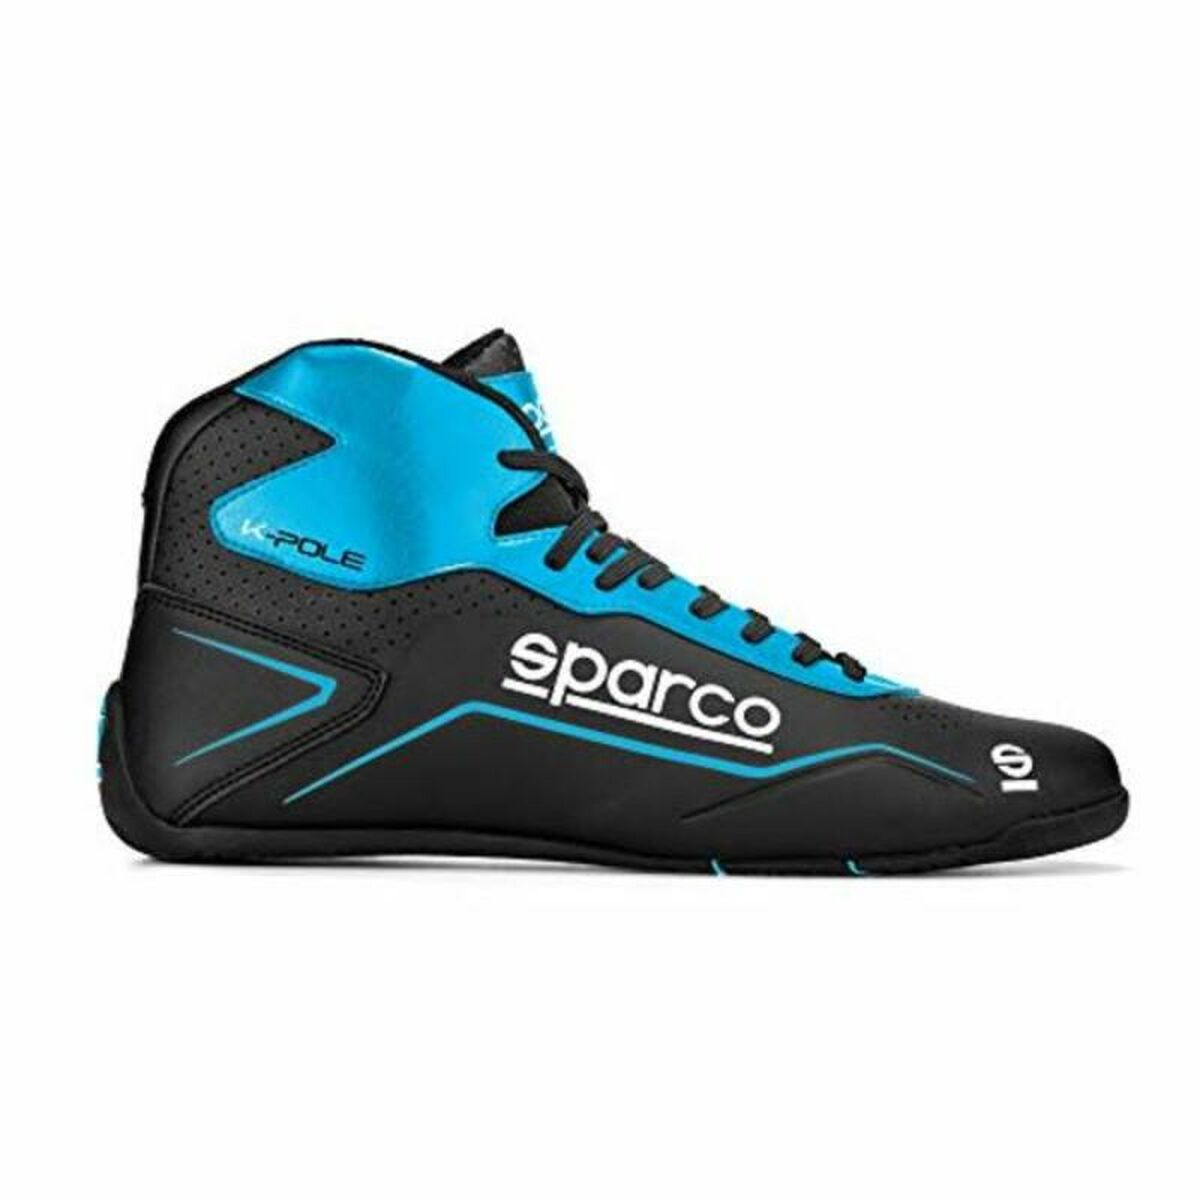 Racing Ankle Boots Sparco K-POLE Blue Talla 37